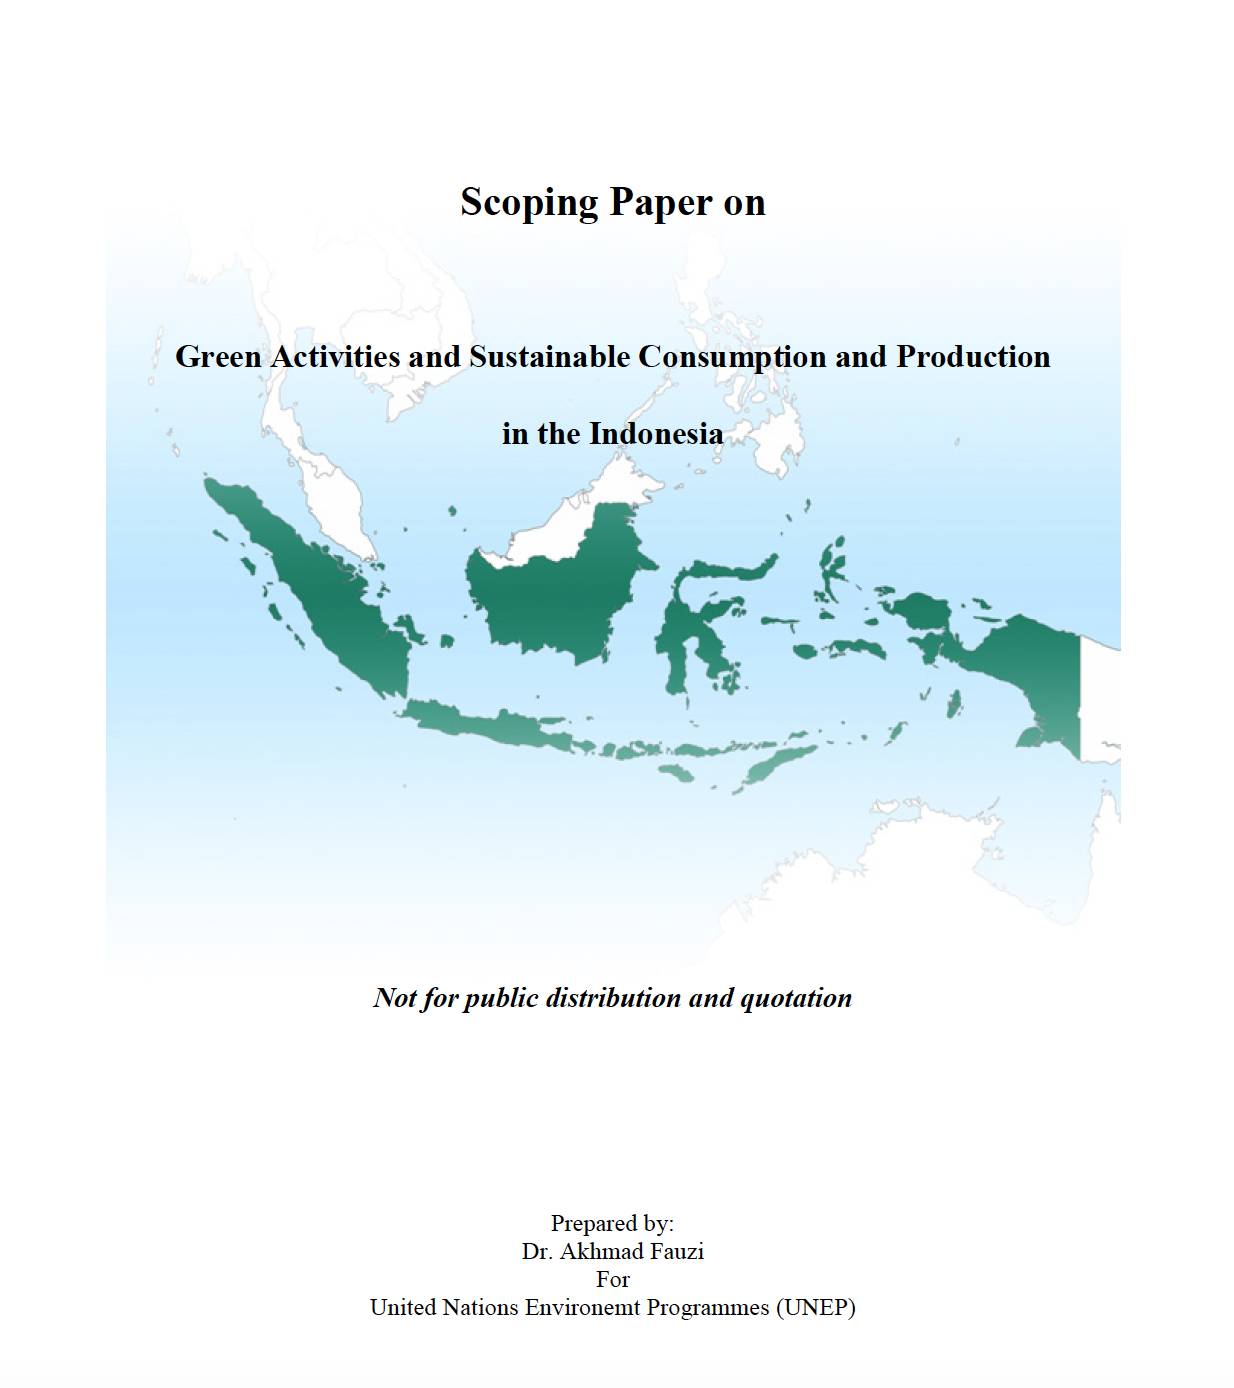 Scoping Paper: Green Activities and Sustainable Consumption and Production in the Indonesia